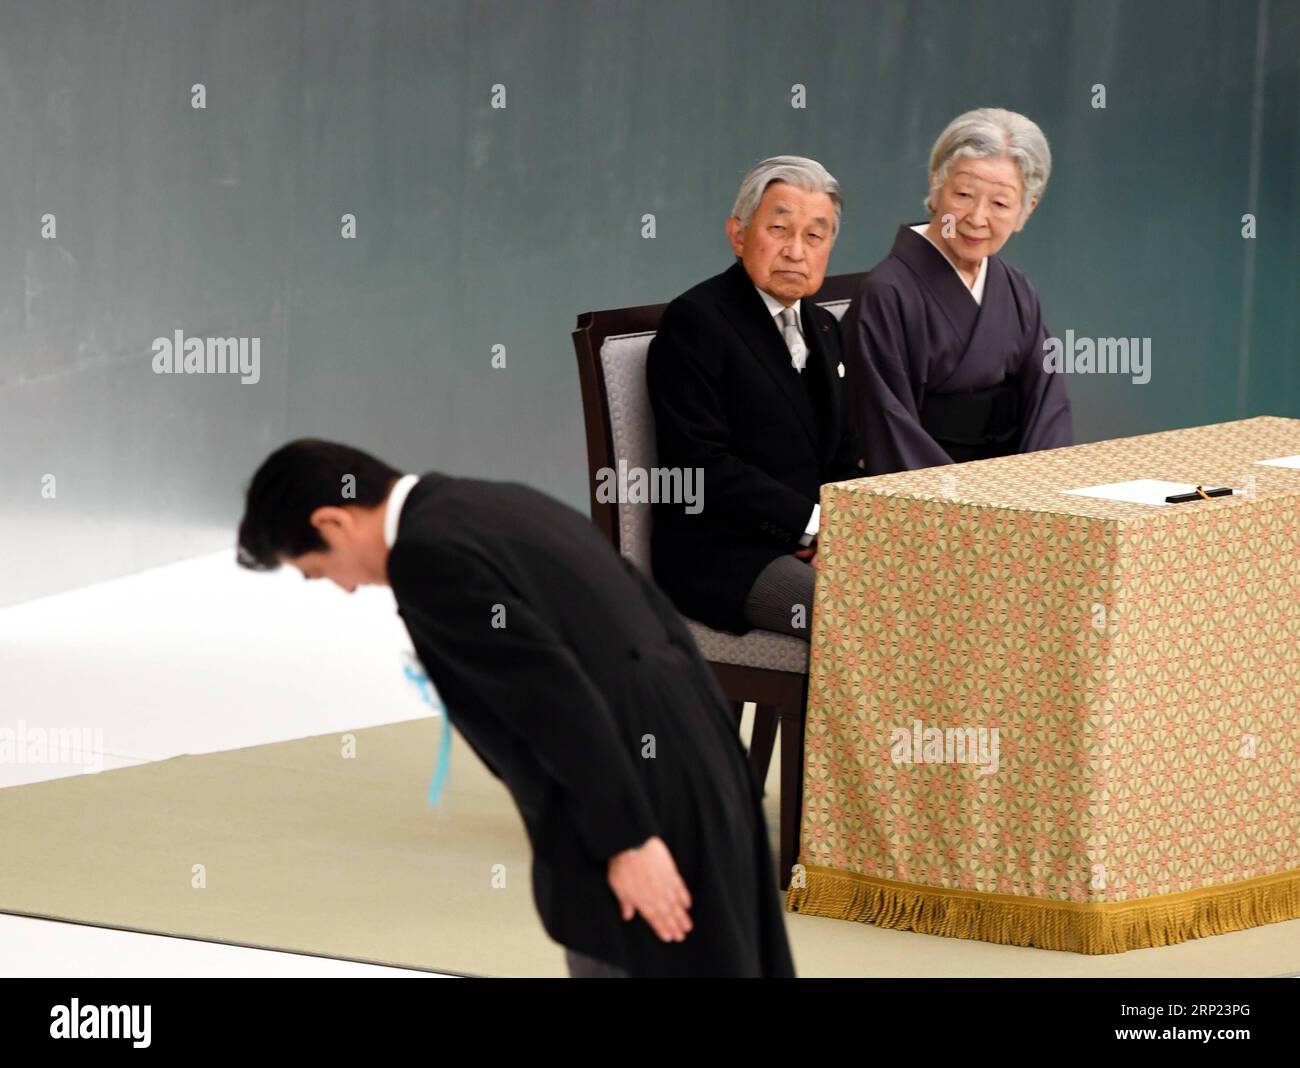 (180815) -- TOKYO, Aug. 15, 2018 -- Japanese Emperor Akihito (2nd R), Empress Michiko (1st R) and Prime Minister Shinzo Abe (L) attend the ceremony marking the 73rd anniversary of Japan s surrender in World War II in Tokyo, Japan, Aug. 15, 2018. Japan on Wednesday observed the 73rd anniversary of its surrender in World War II, with Emperor Akihito reiterating his deep remorse over the country s wartime acts. ) (lrz) JAPAN-TOKYO-WWII-ANNIVERSARY-SURRENDER MaxPing PUBLICATIONxNOTxINxCHN Stock Photo